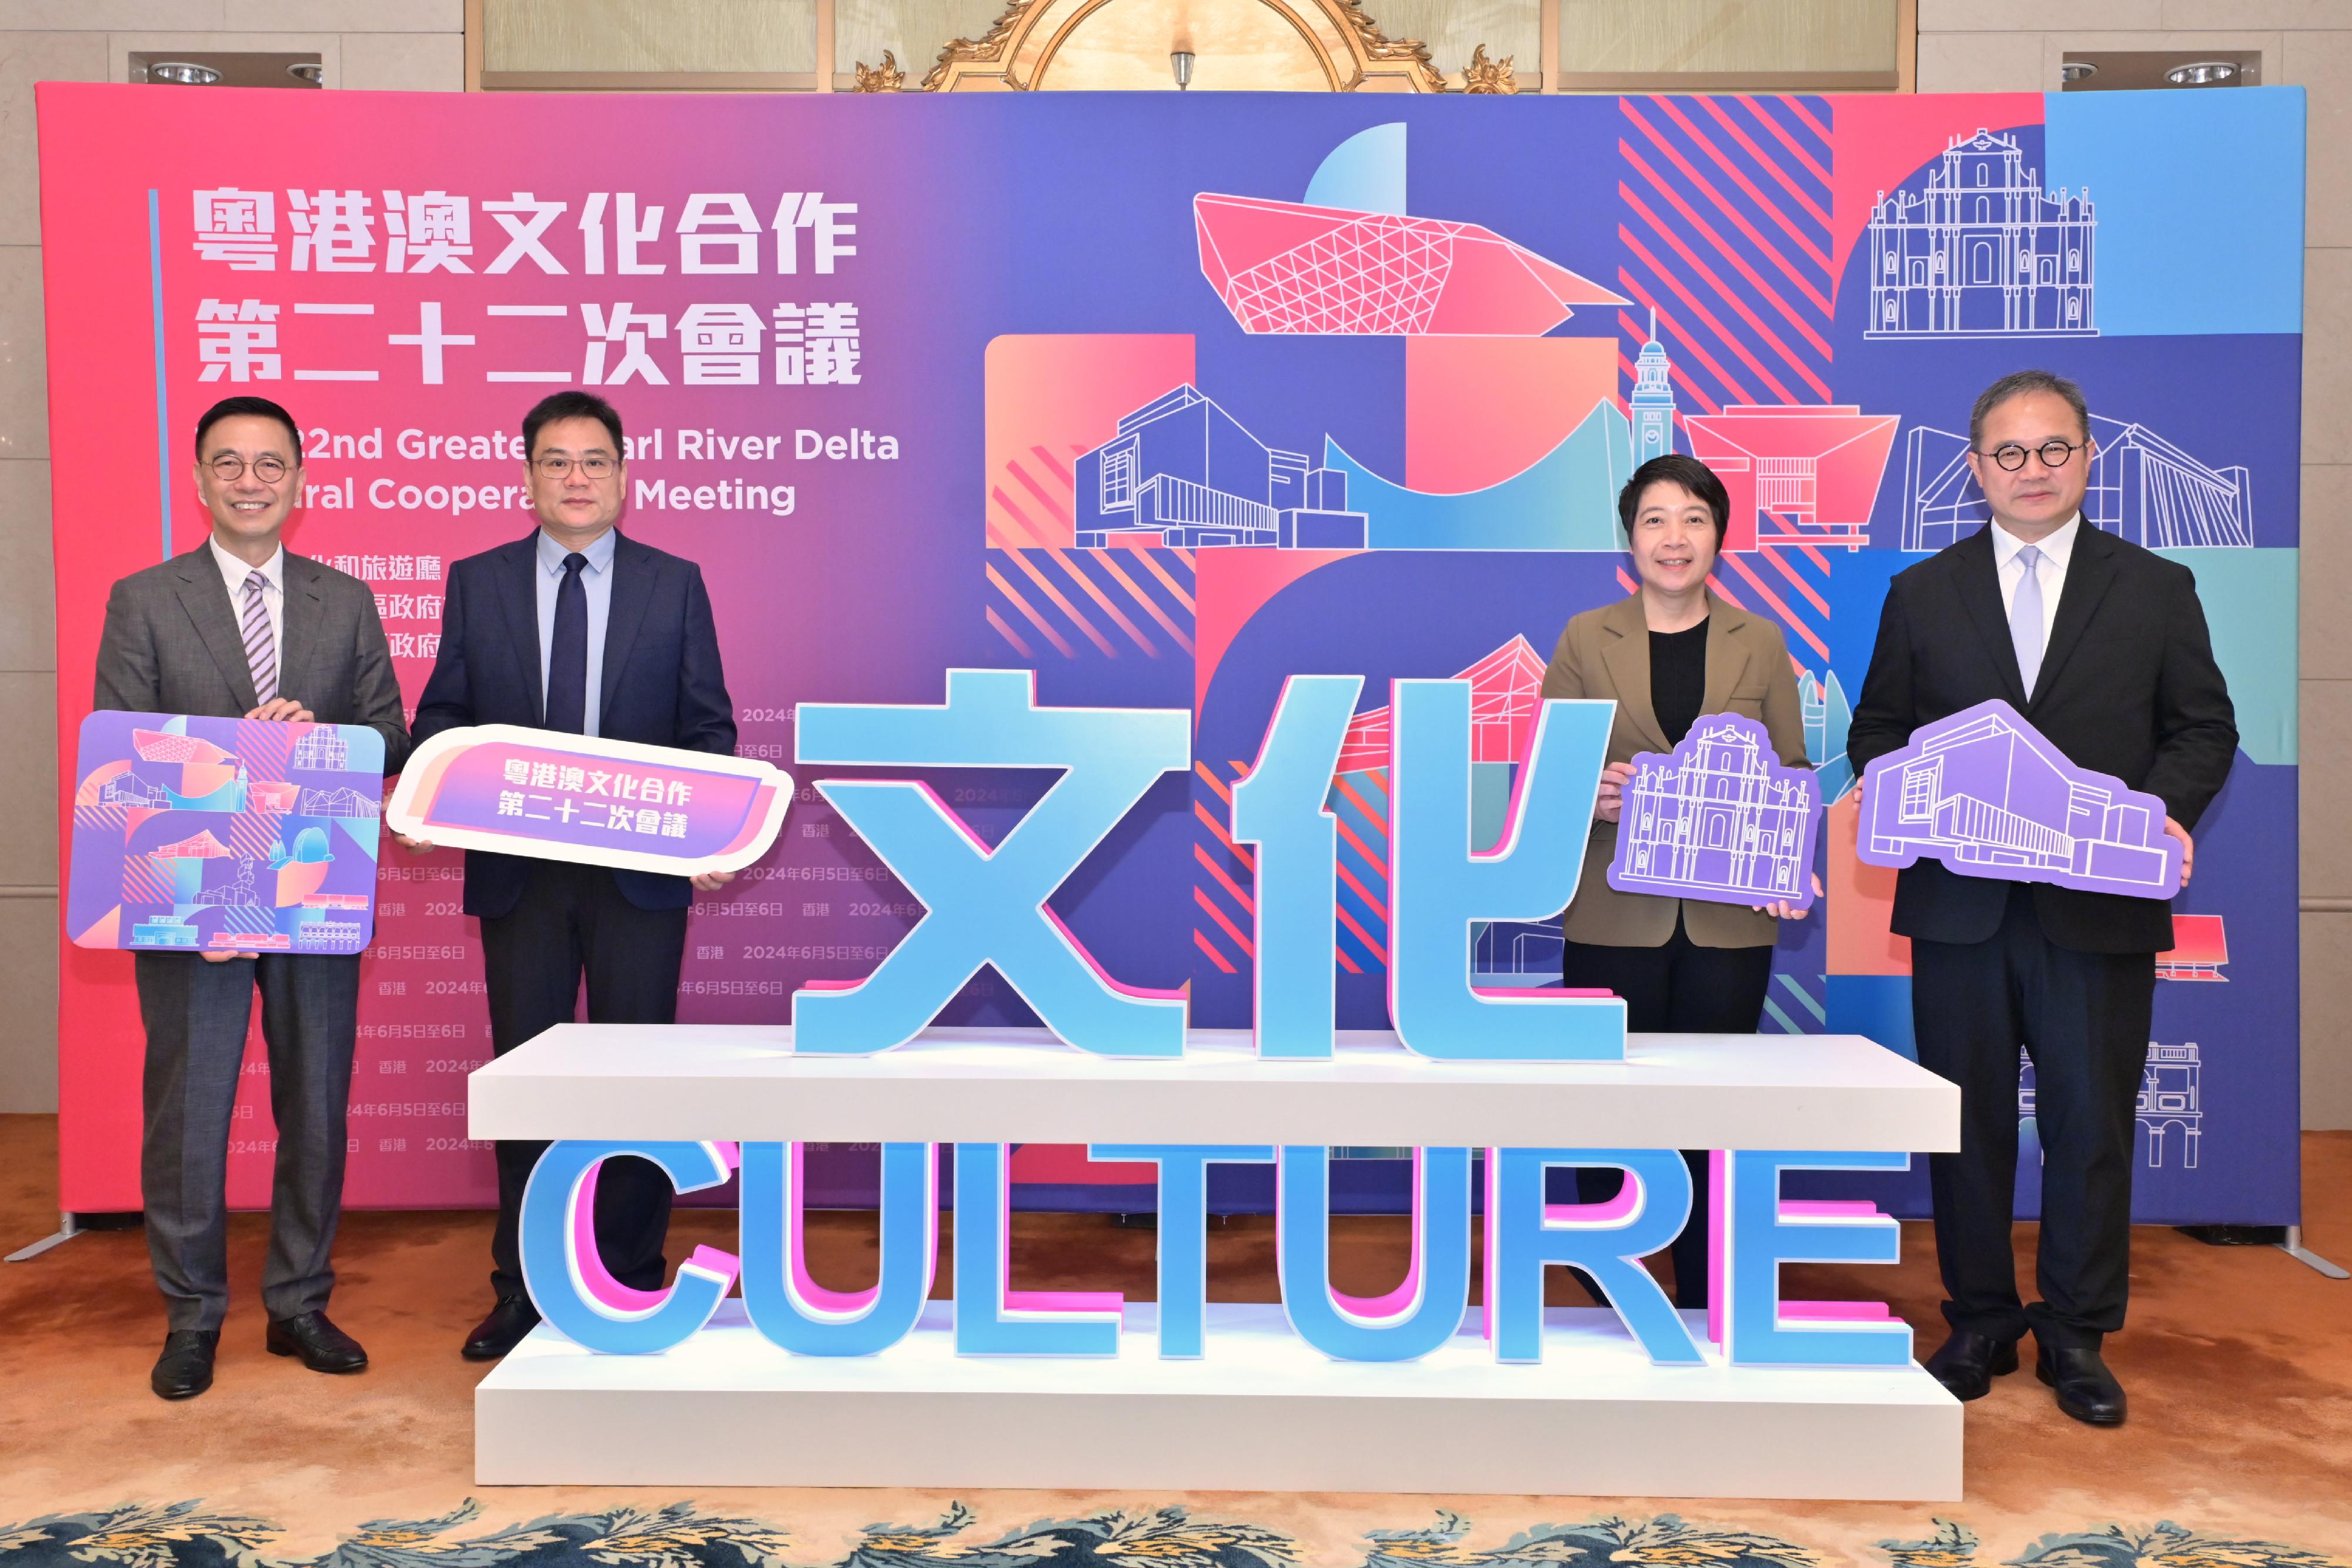 The 22nd Greater Pearl River Delta Cultural Cooperation Meeting (the Meeting), co-ordinated by the Culture, Sports and Tourism Bureau, was concluded in Hong Kong today (June 6). Photo shows the Secretary for Culture, Sports and Tourism, Mr Kevin Yeung (first left); the Director General of the Department of Culture and Tourism of Guangdong Province, Mr Li Bin (second left); the Director of the Cultural Affairs Bureau of the Macao Special Administrative Region, Ms Leong Wai-man (second right); and the Permanent Secretary for Culture, Sports and Tourism, Mr Joe Wong (first right), before the Meeting today.